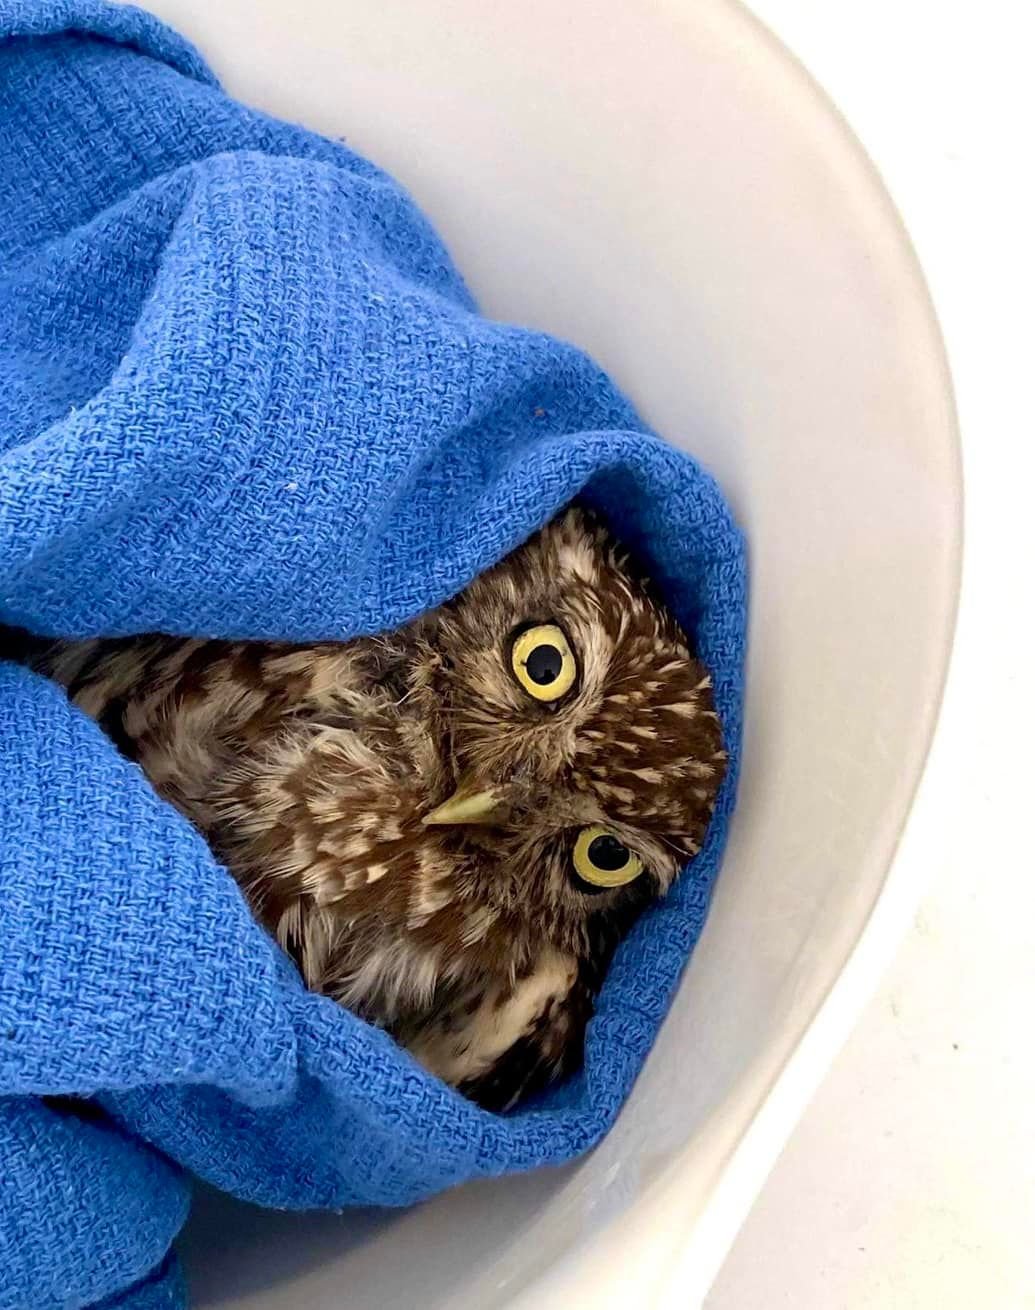 Little owl youngster on the mend